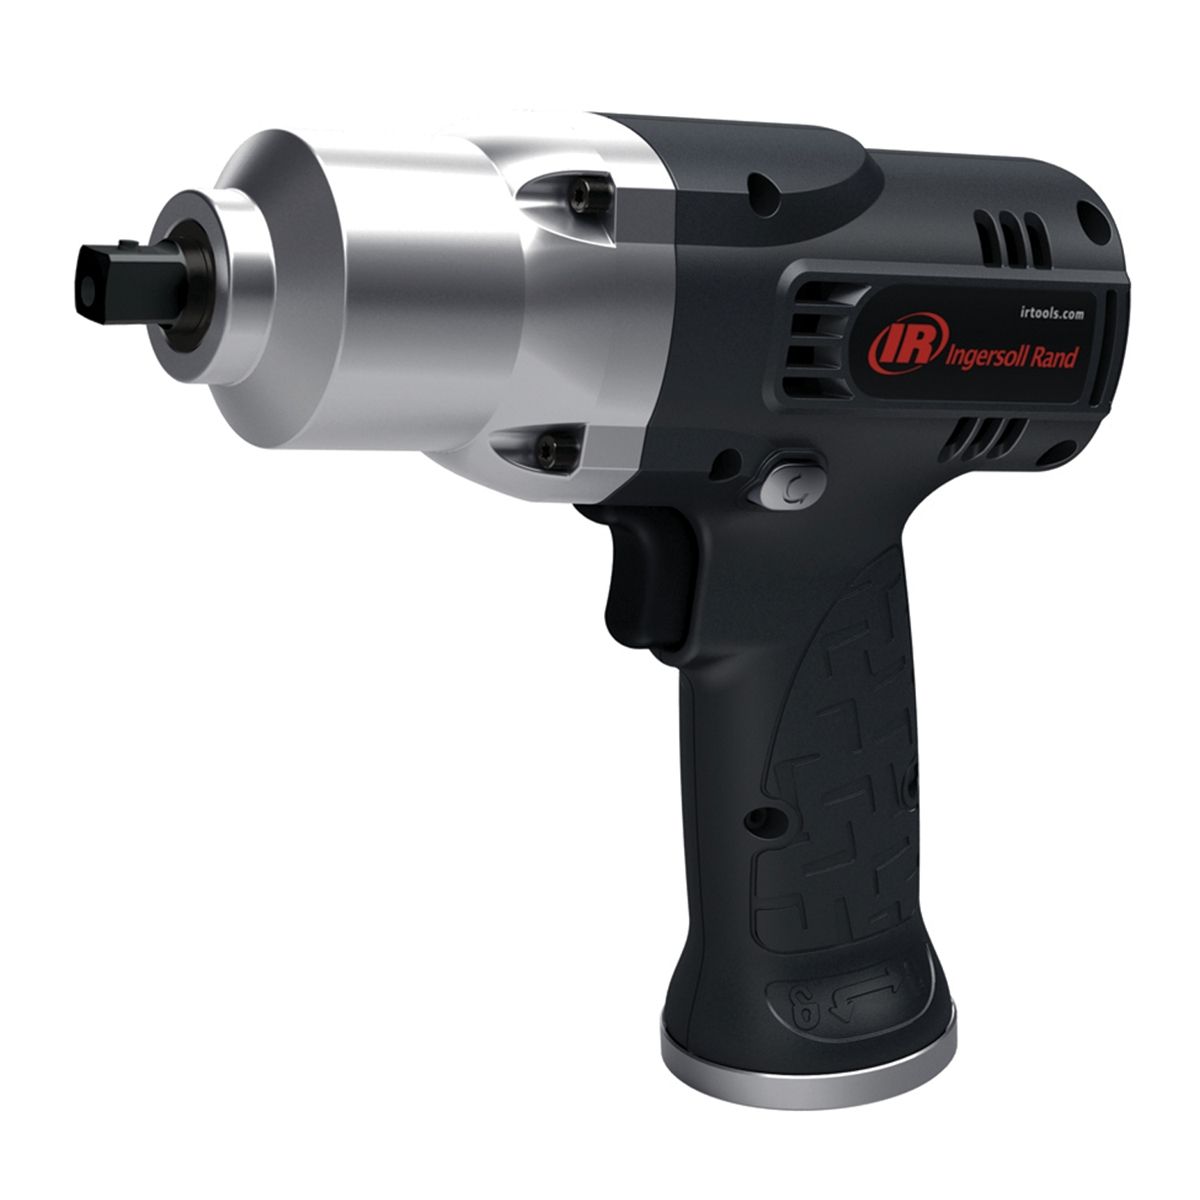 14.4V 1/2 In Square Drive Cordless Impactool